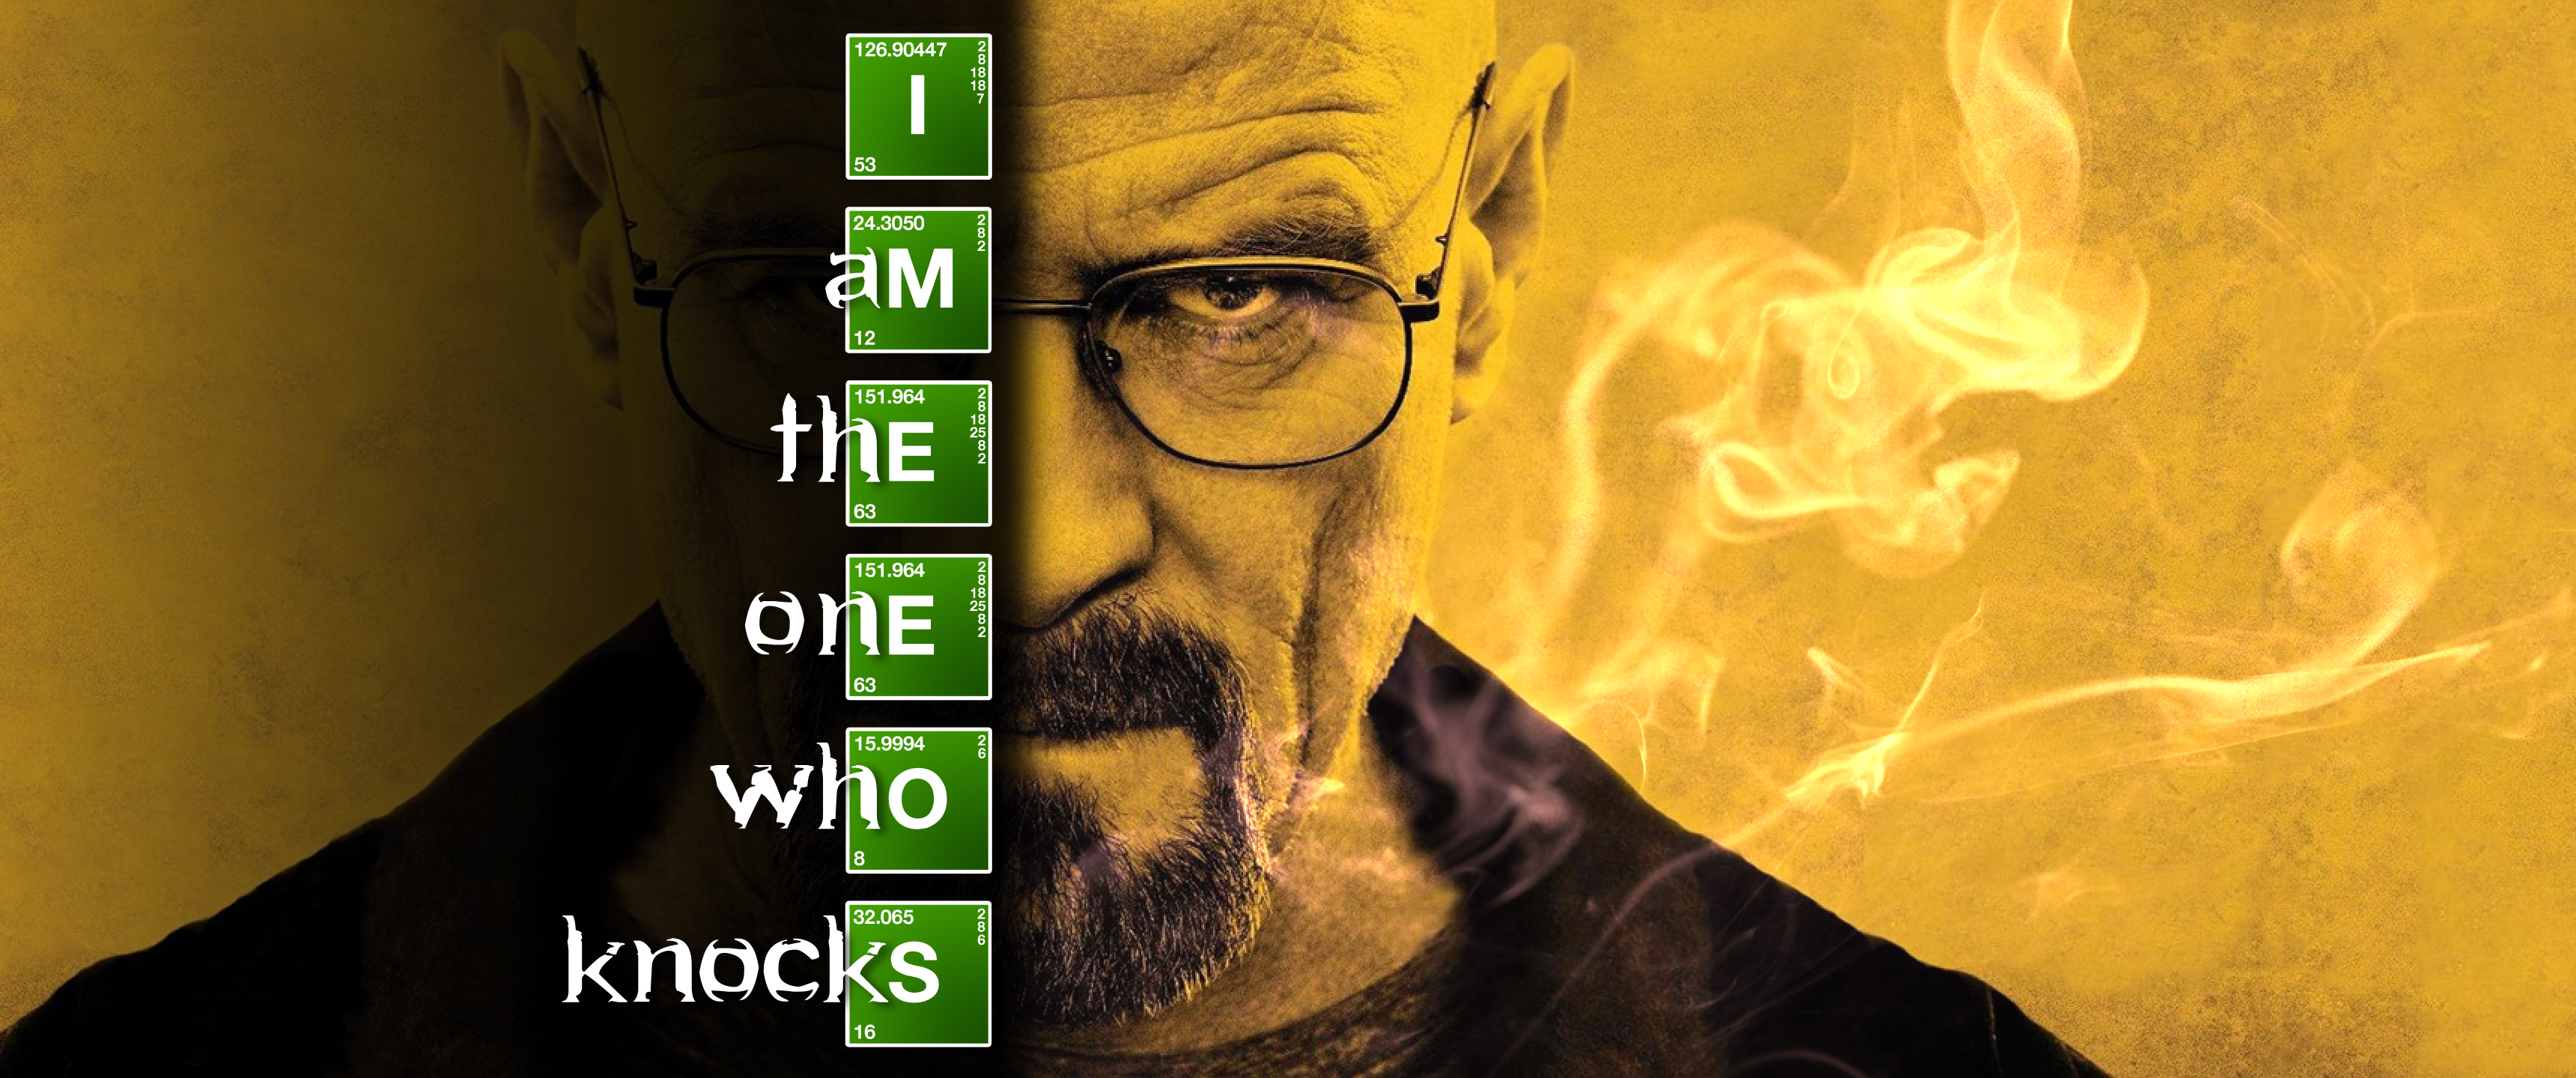 44+ Breaking Bad Wallpapers: HD, 4K, 5K for PC and Mobile | Download free  images for iPhone, Android